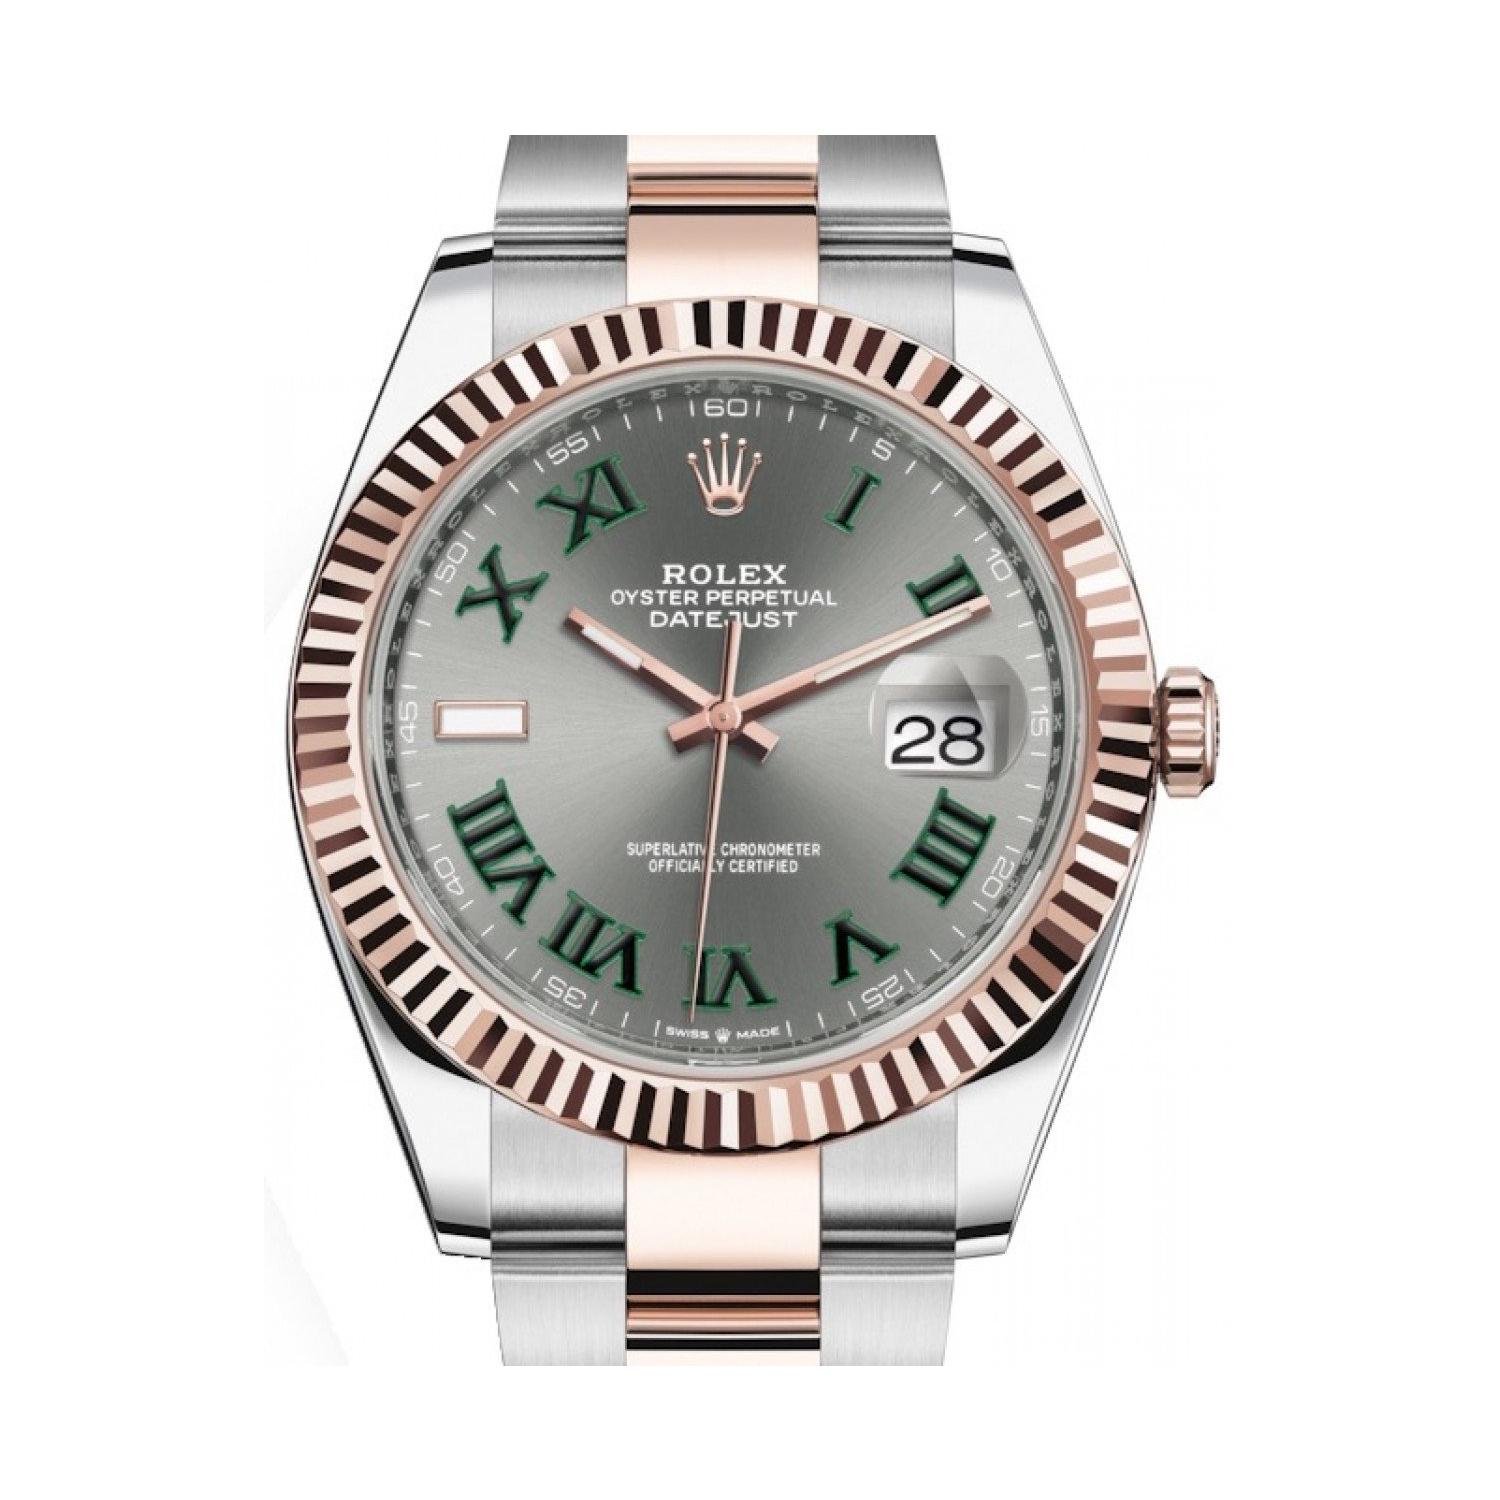 This brand new Rolex Datejust 41 126331 is a beautiful men's timepiece that is powered by mechanical (automatic) movement which is cased in a stainless steel case. It has a round shape face, date indicator dial and has hand roman numerals style